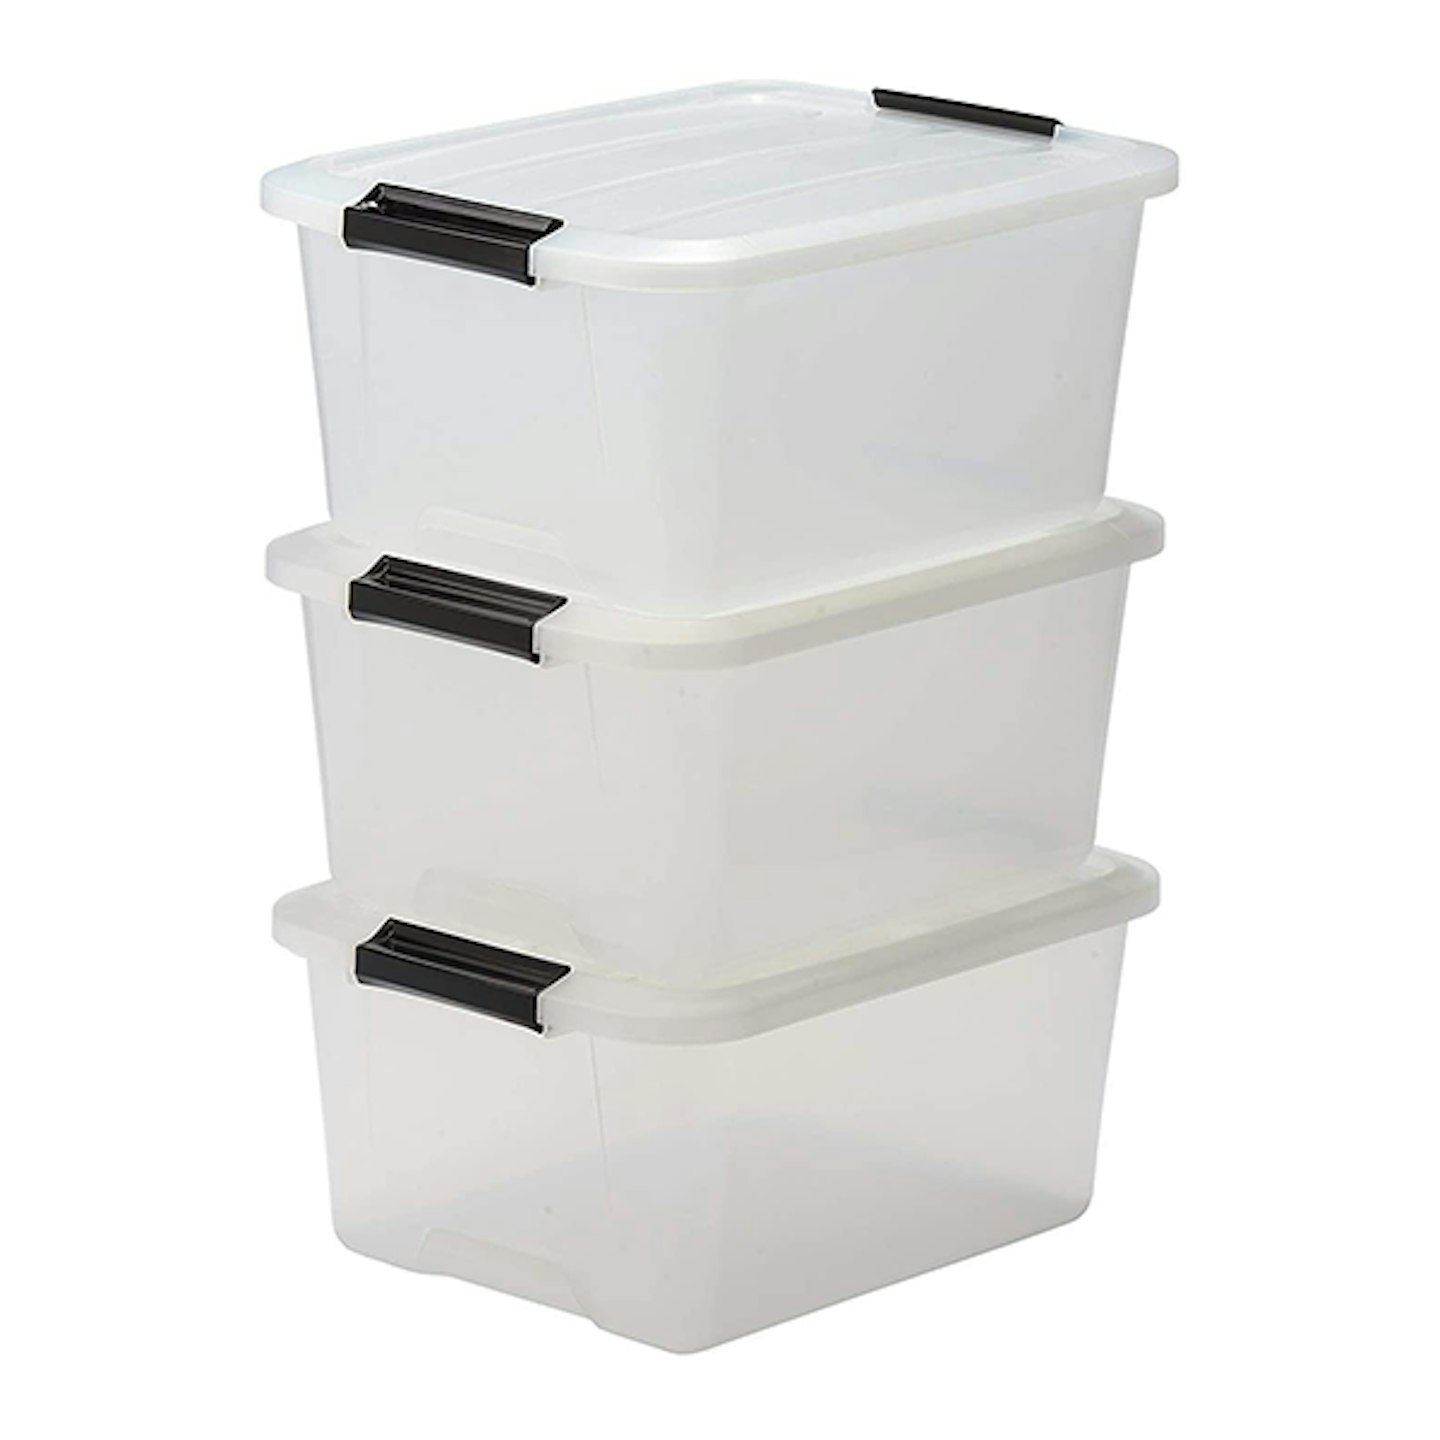 Rubbermaid BRUTE Tote with Lid - 75.5 Ltr - White